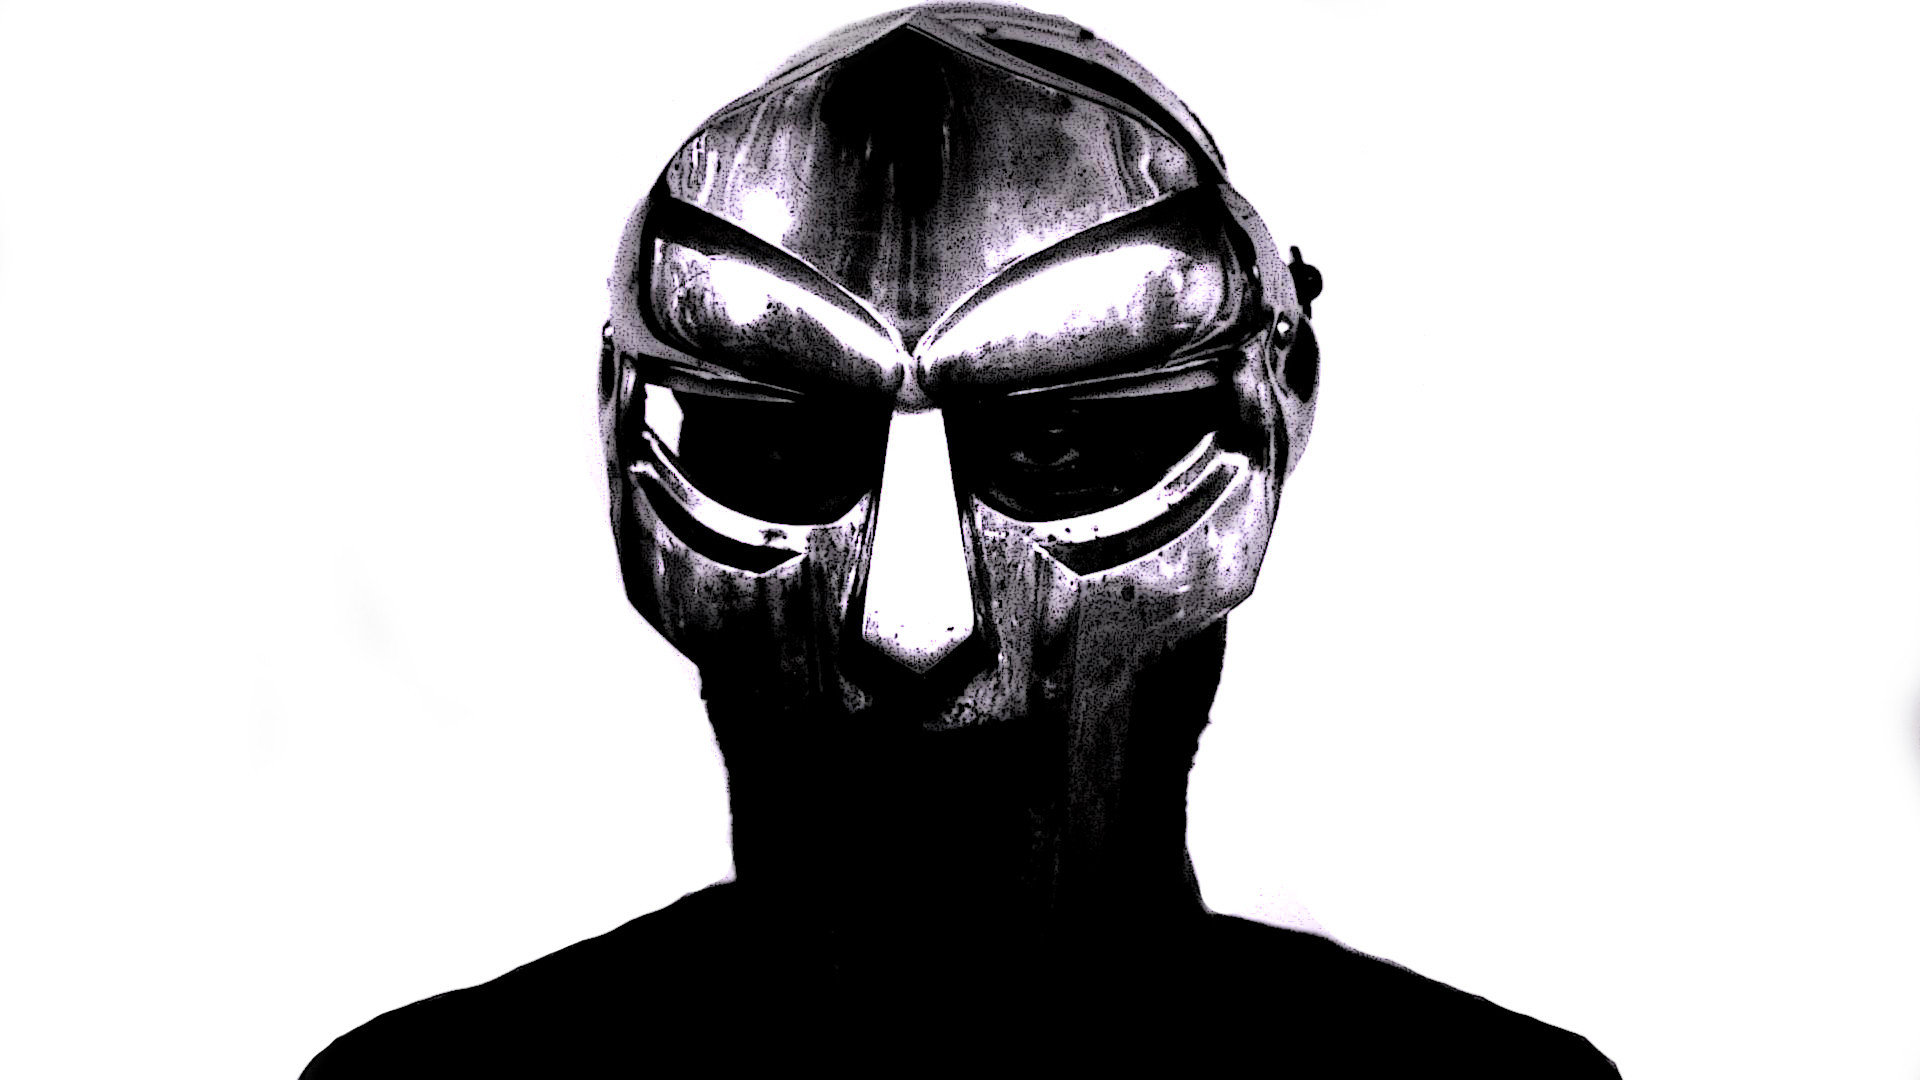 MF DOOM – His Exit Was as Elusive and Iconic as his Masked Career